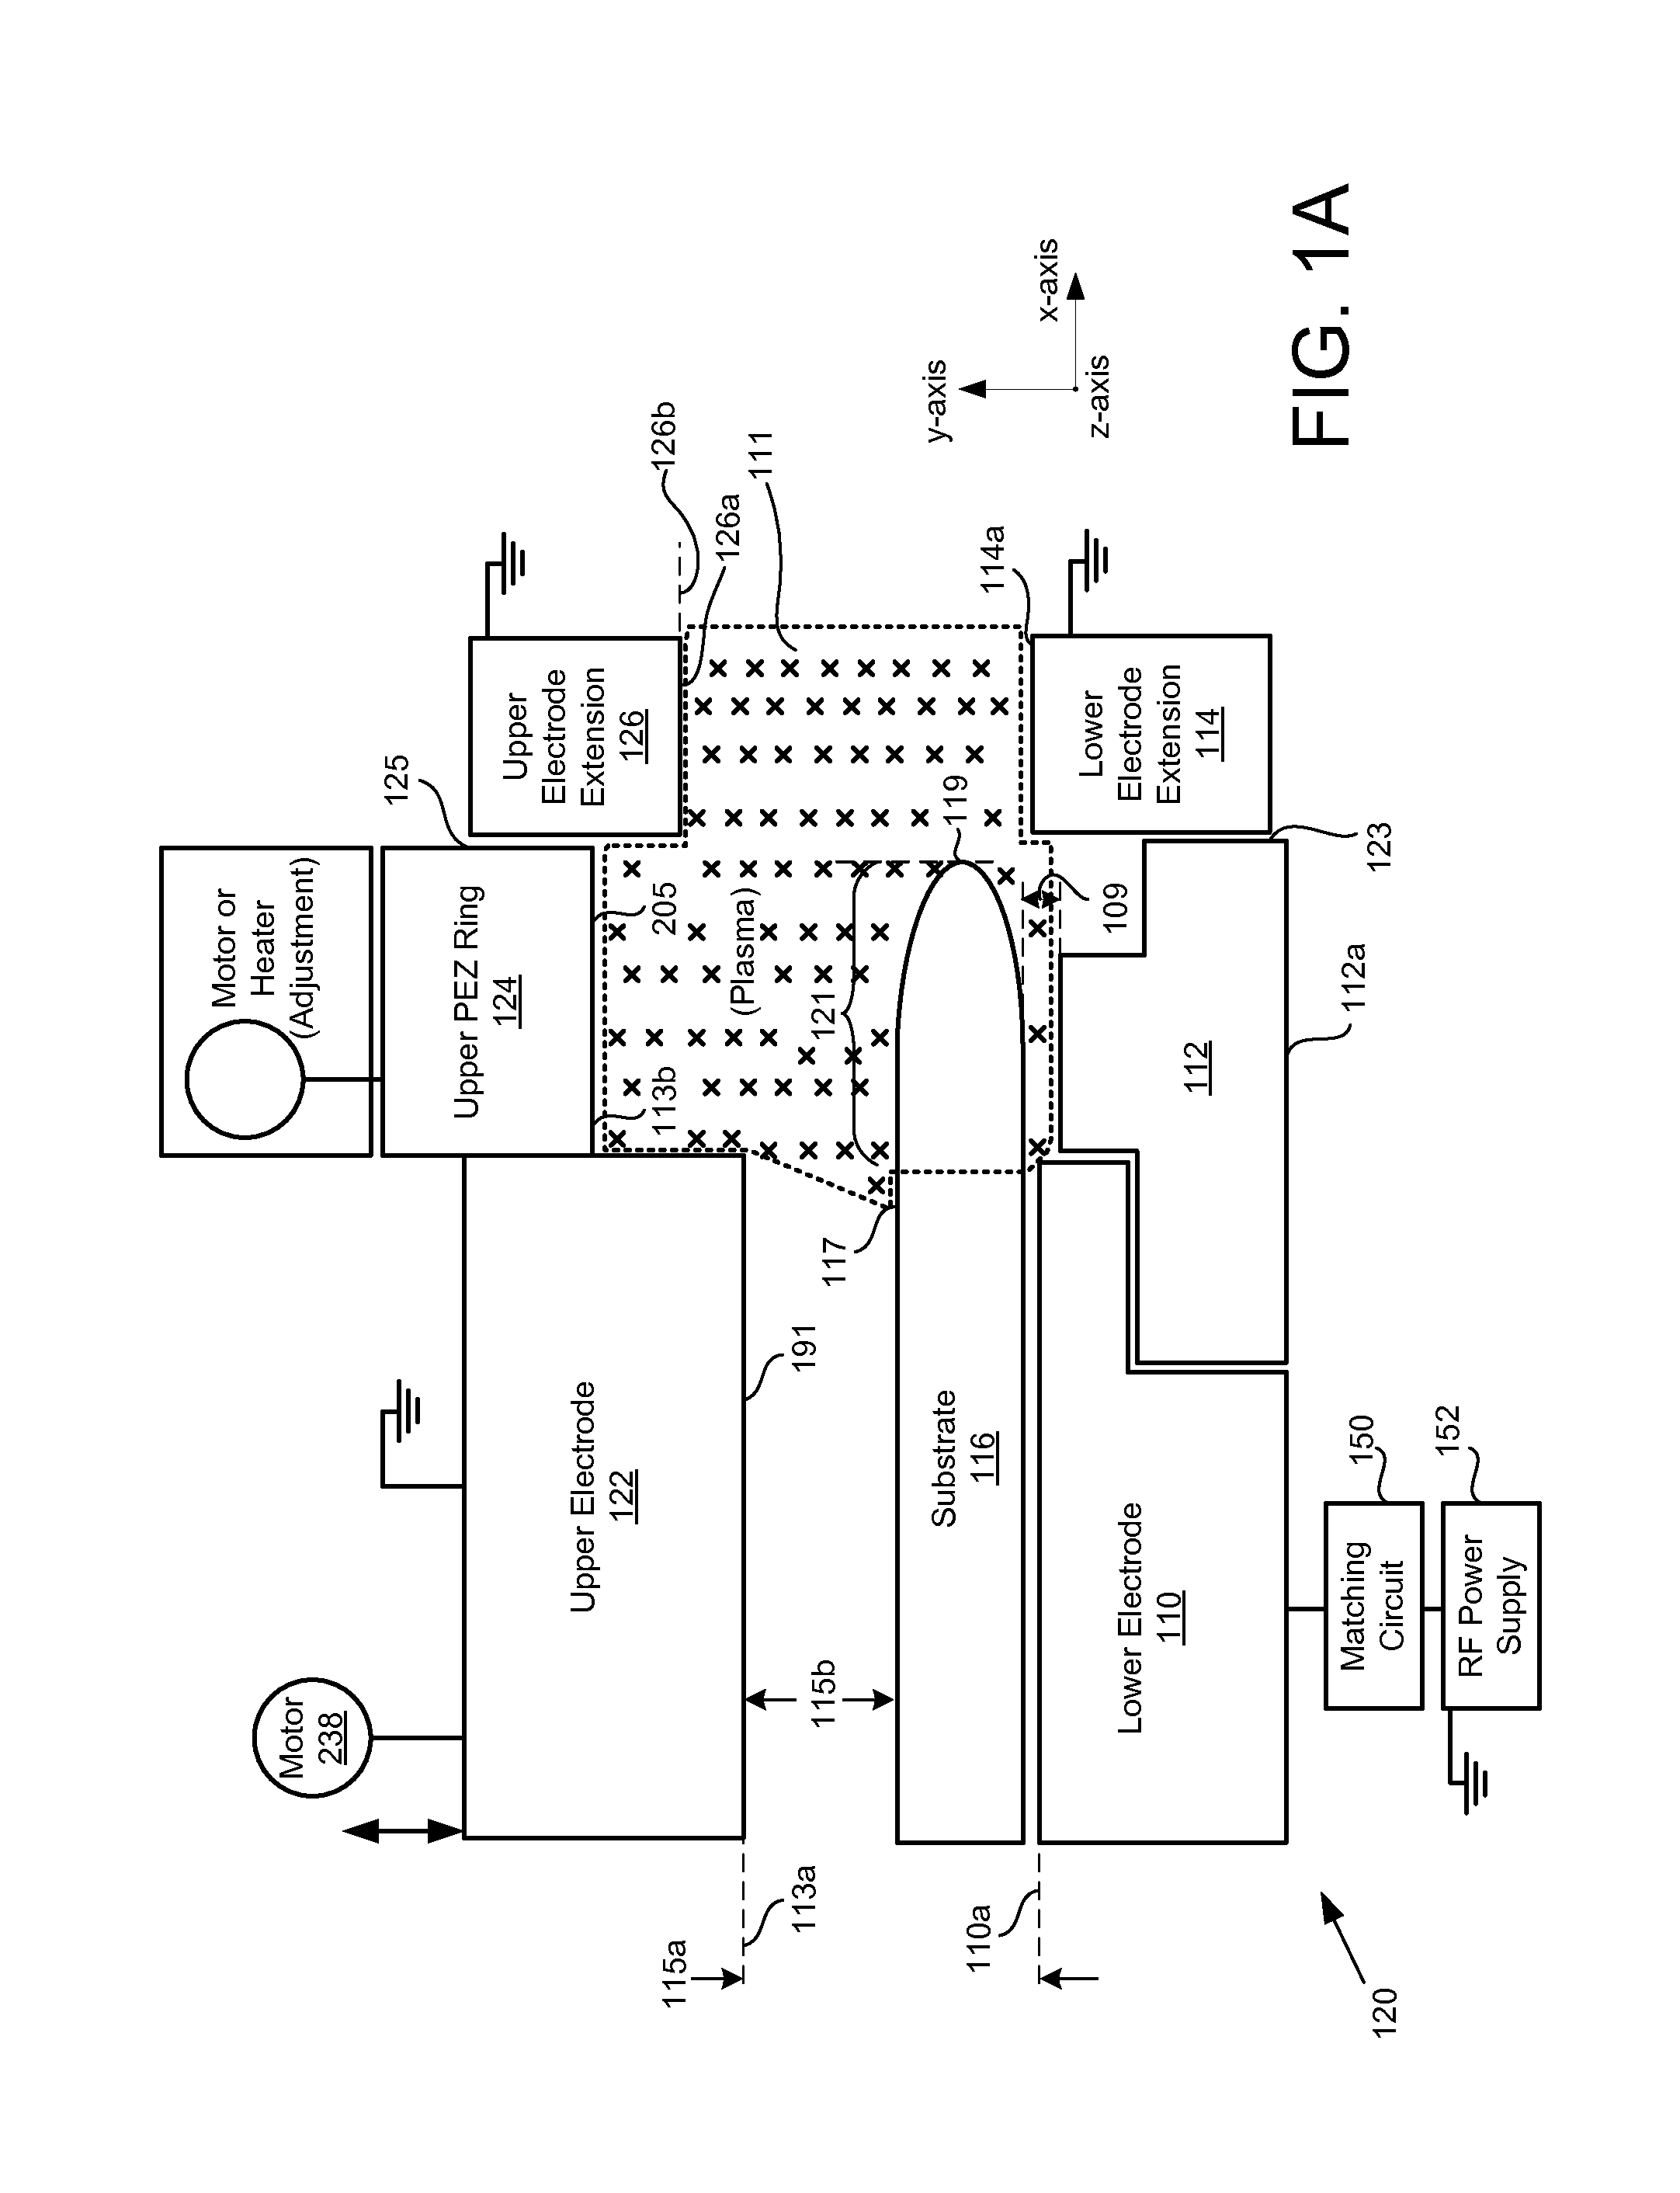 Edge exclusion control with adjustable plasma exclusion zone ring